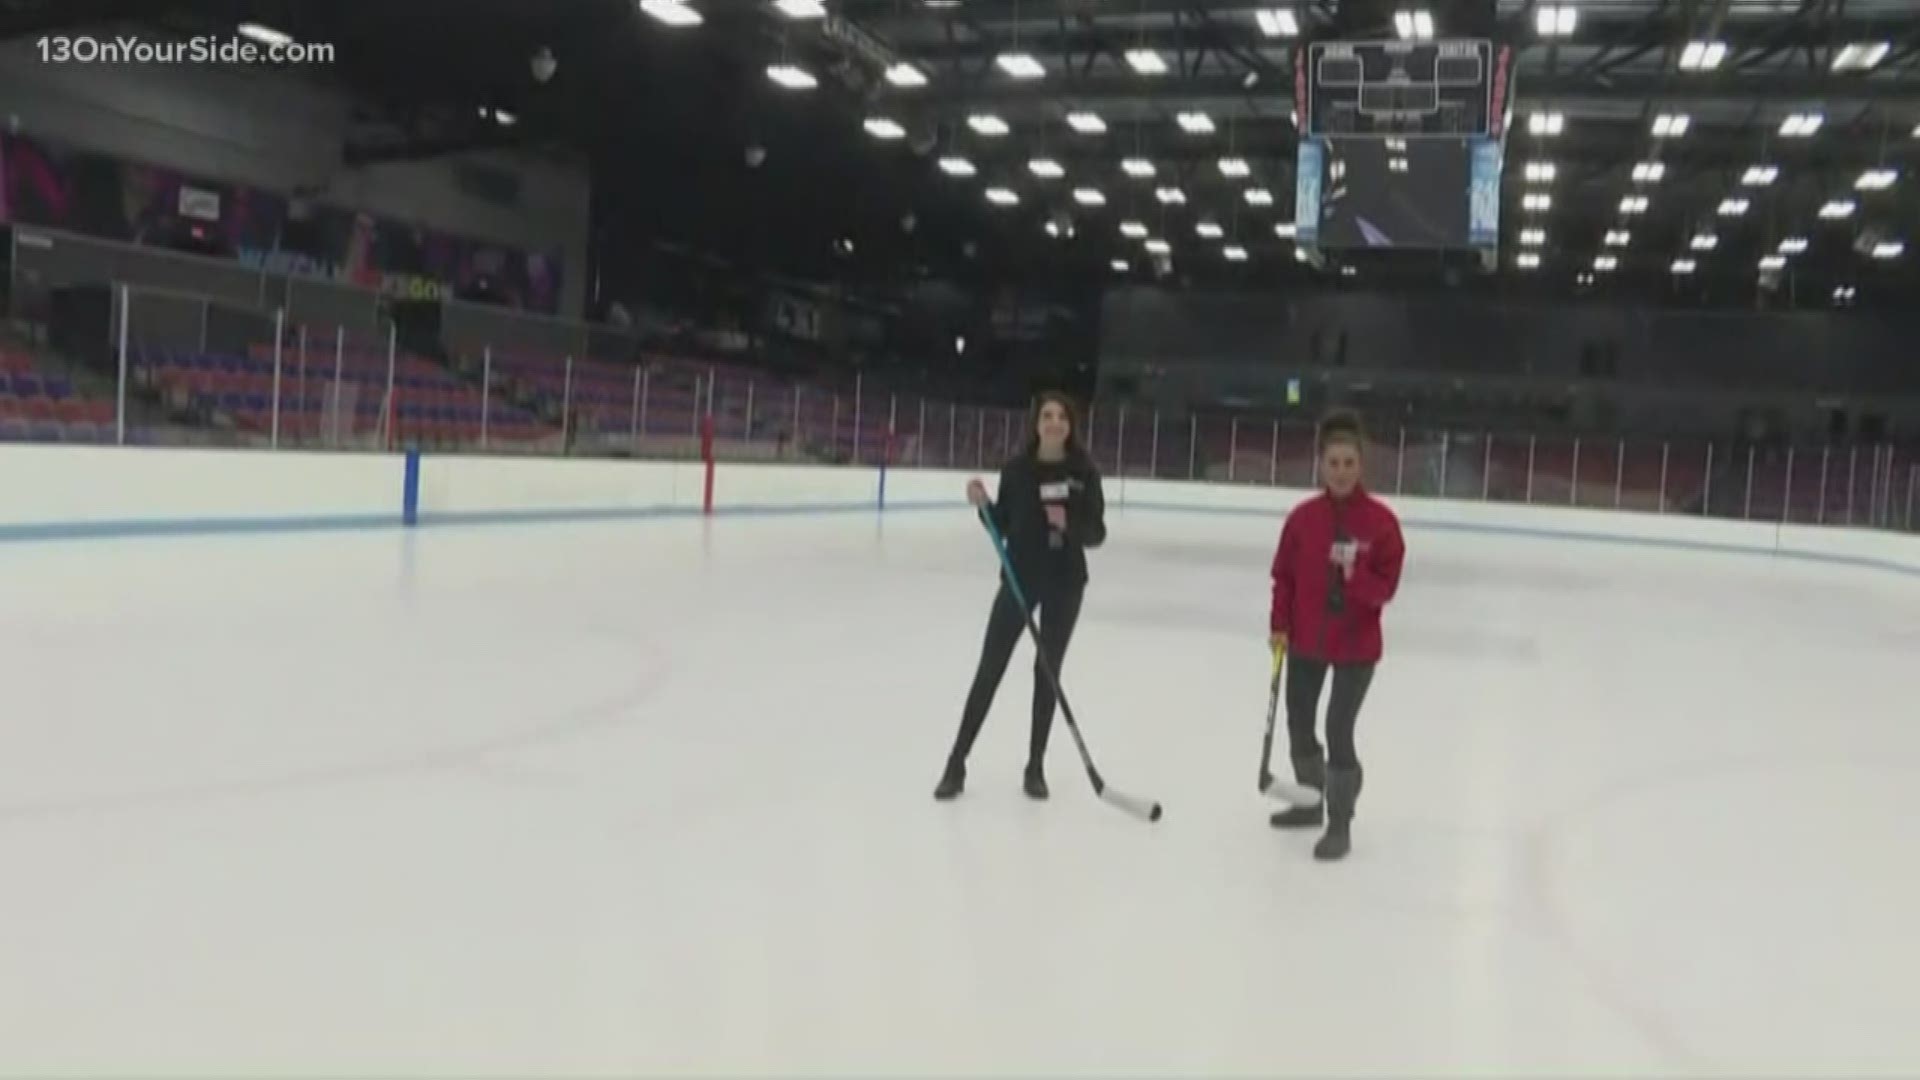 The Muskegon Lumberjacks' home opener is this weekend and what better way to prepare than putting 13 ON YOUR SIDE's Shanna Grove and Kristin Mazur on the ice?